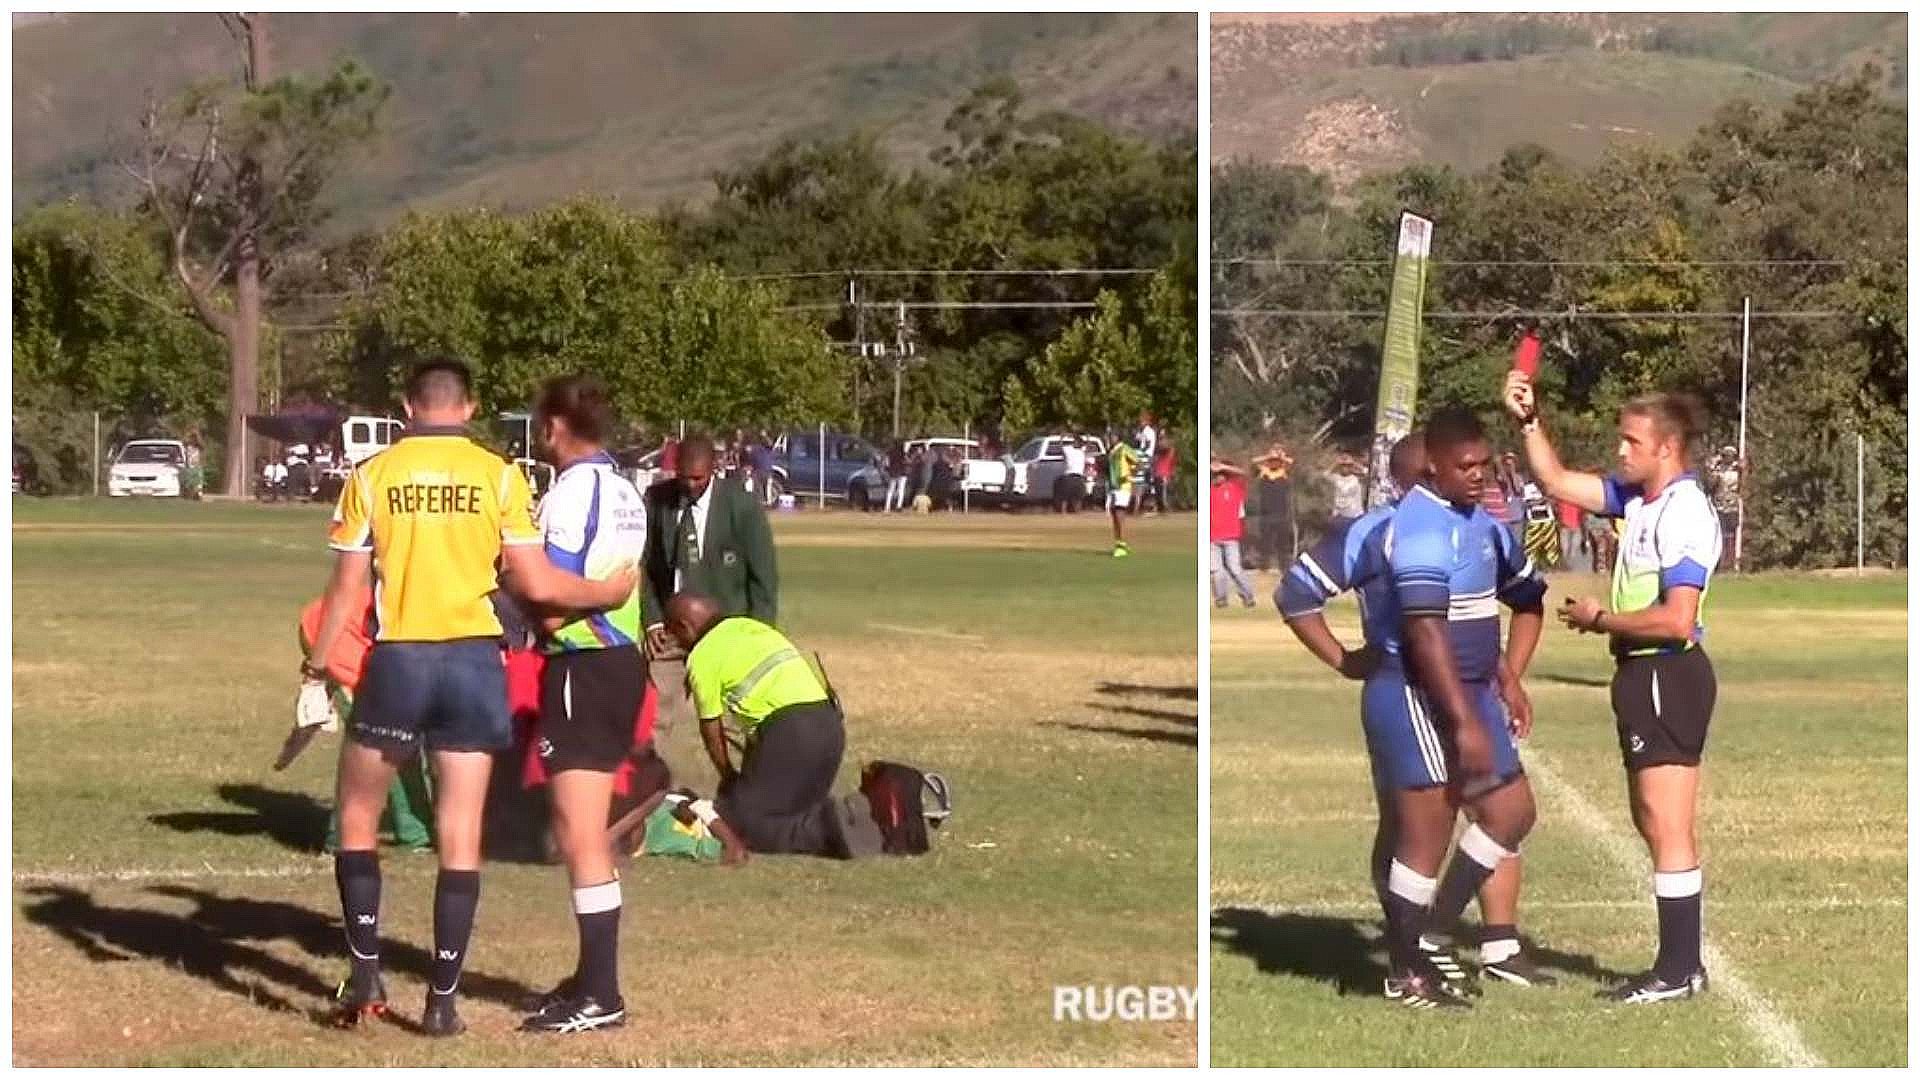 FOOTAGE: Genuinely horrific spear tackle caught on camera